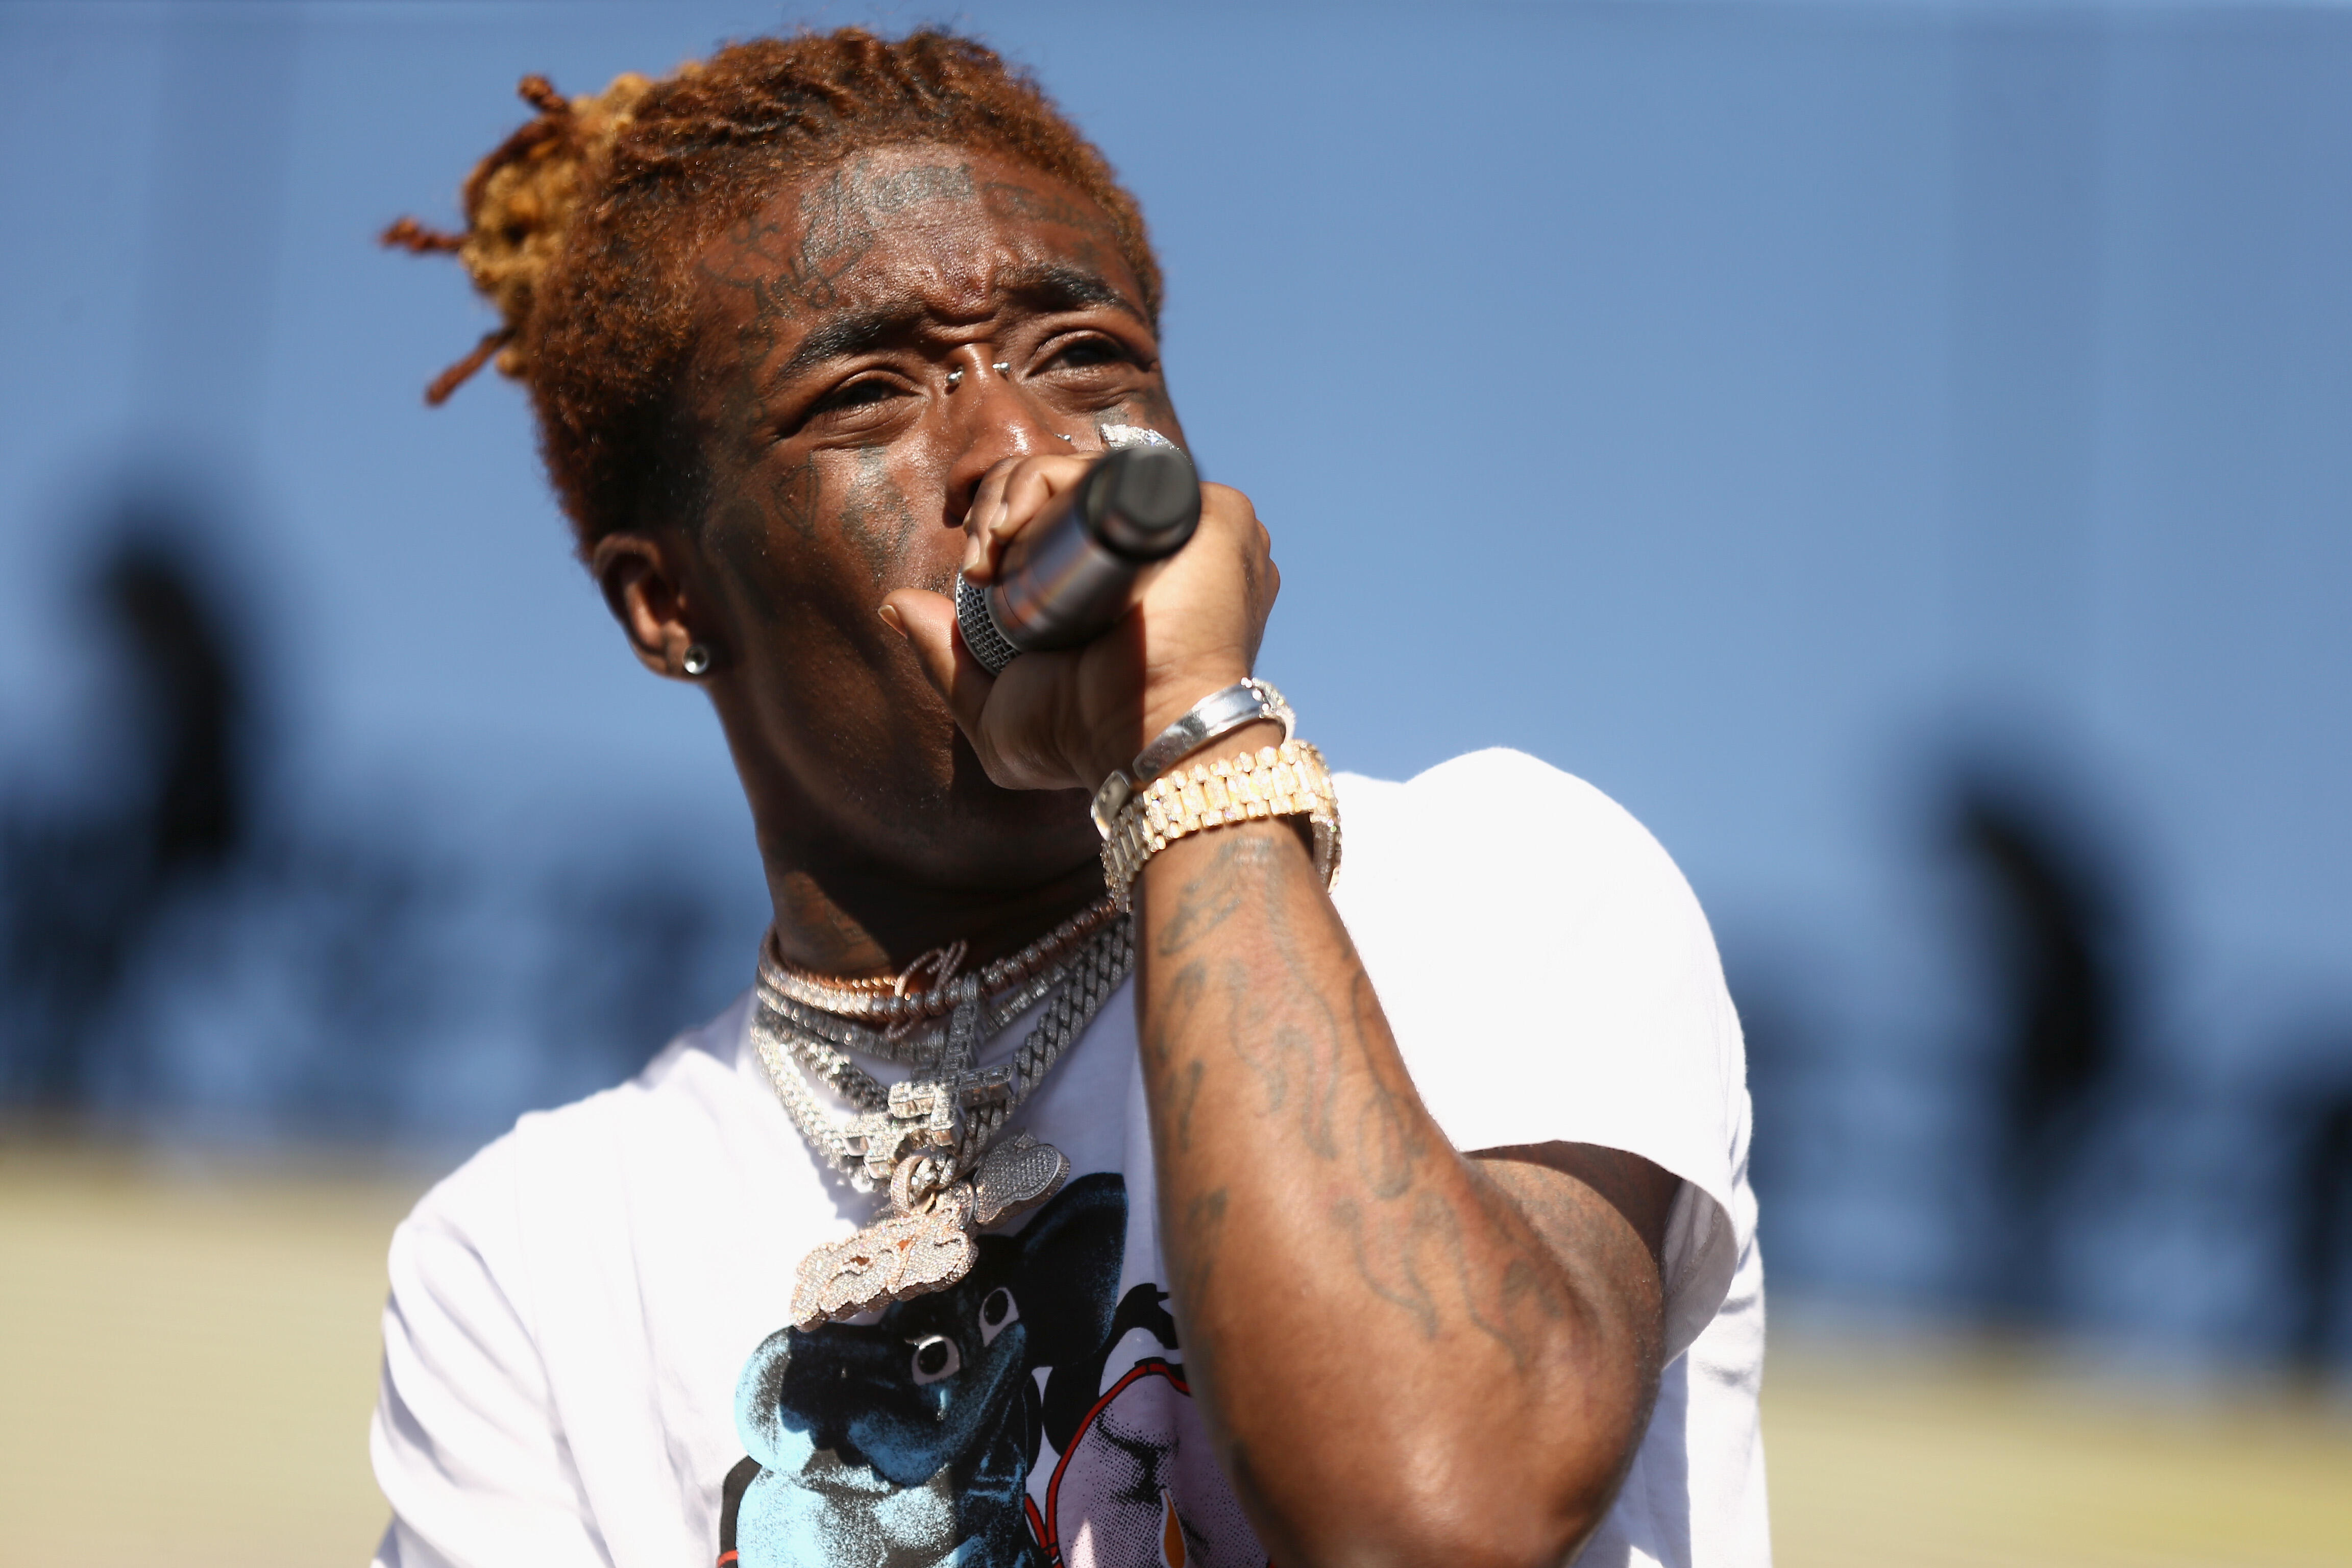 Lil Uzi Vert Announces He S Done With Music Iheartradio